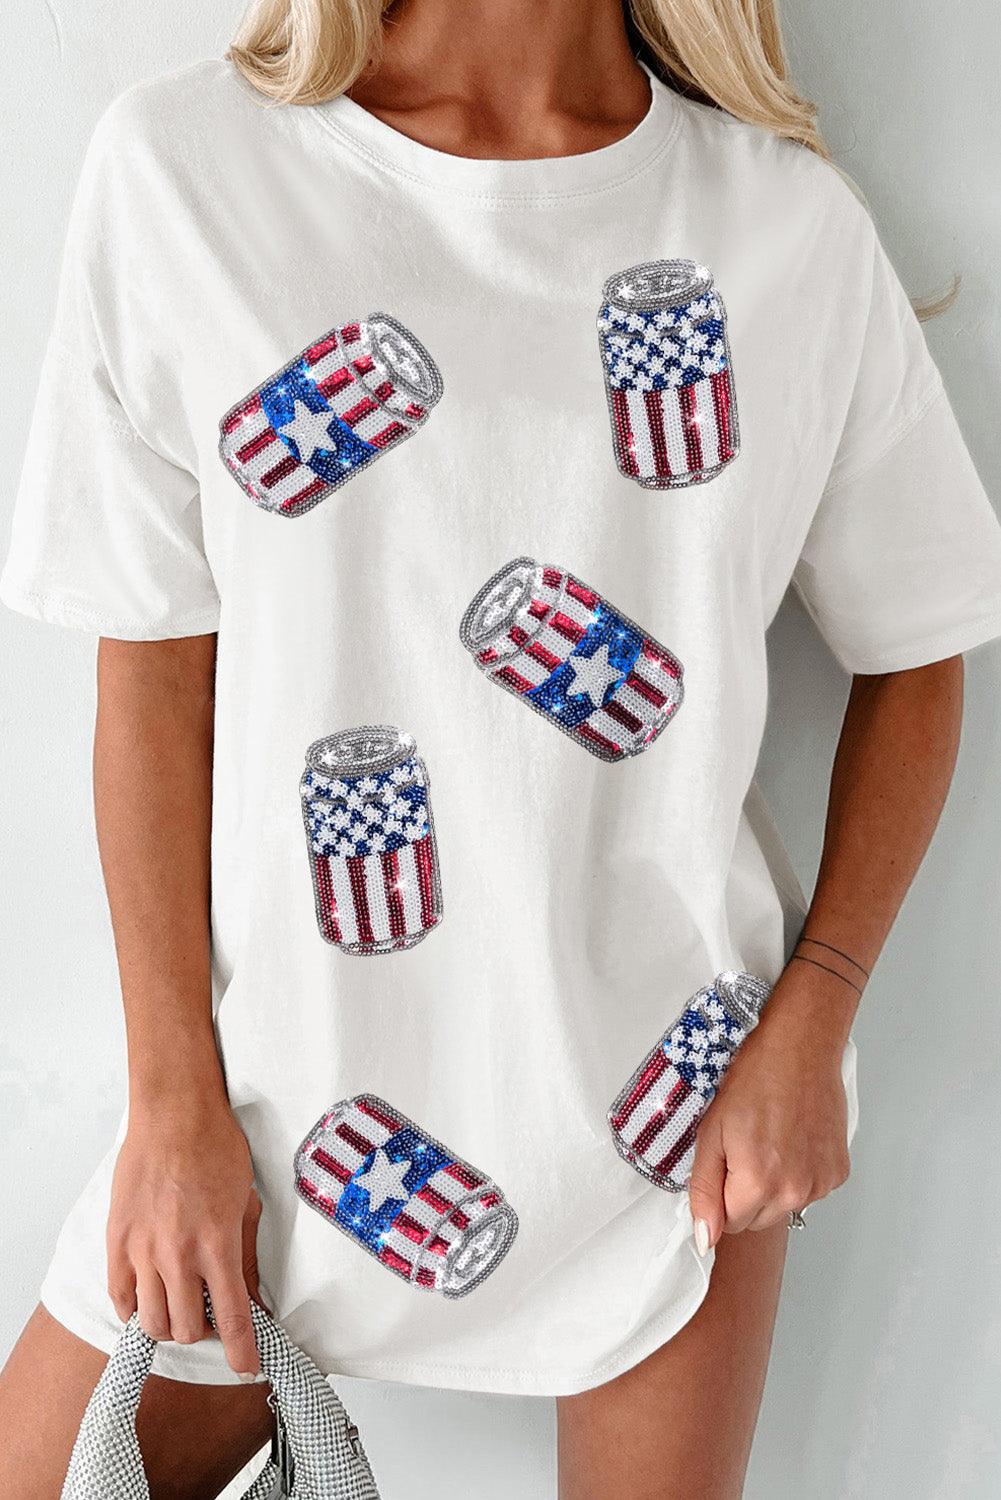 White Sequin American Flag Can Oversized Graphic Tee - L & M Kee, LLC